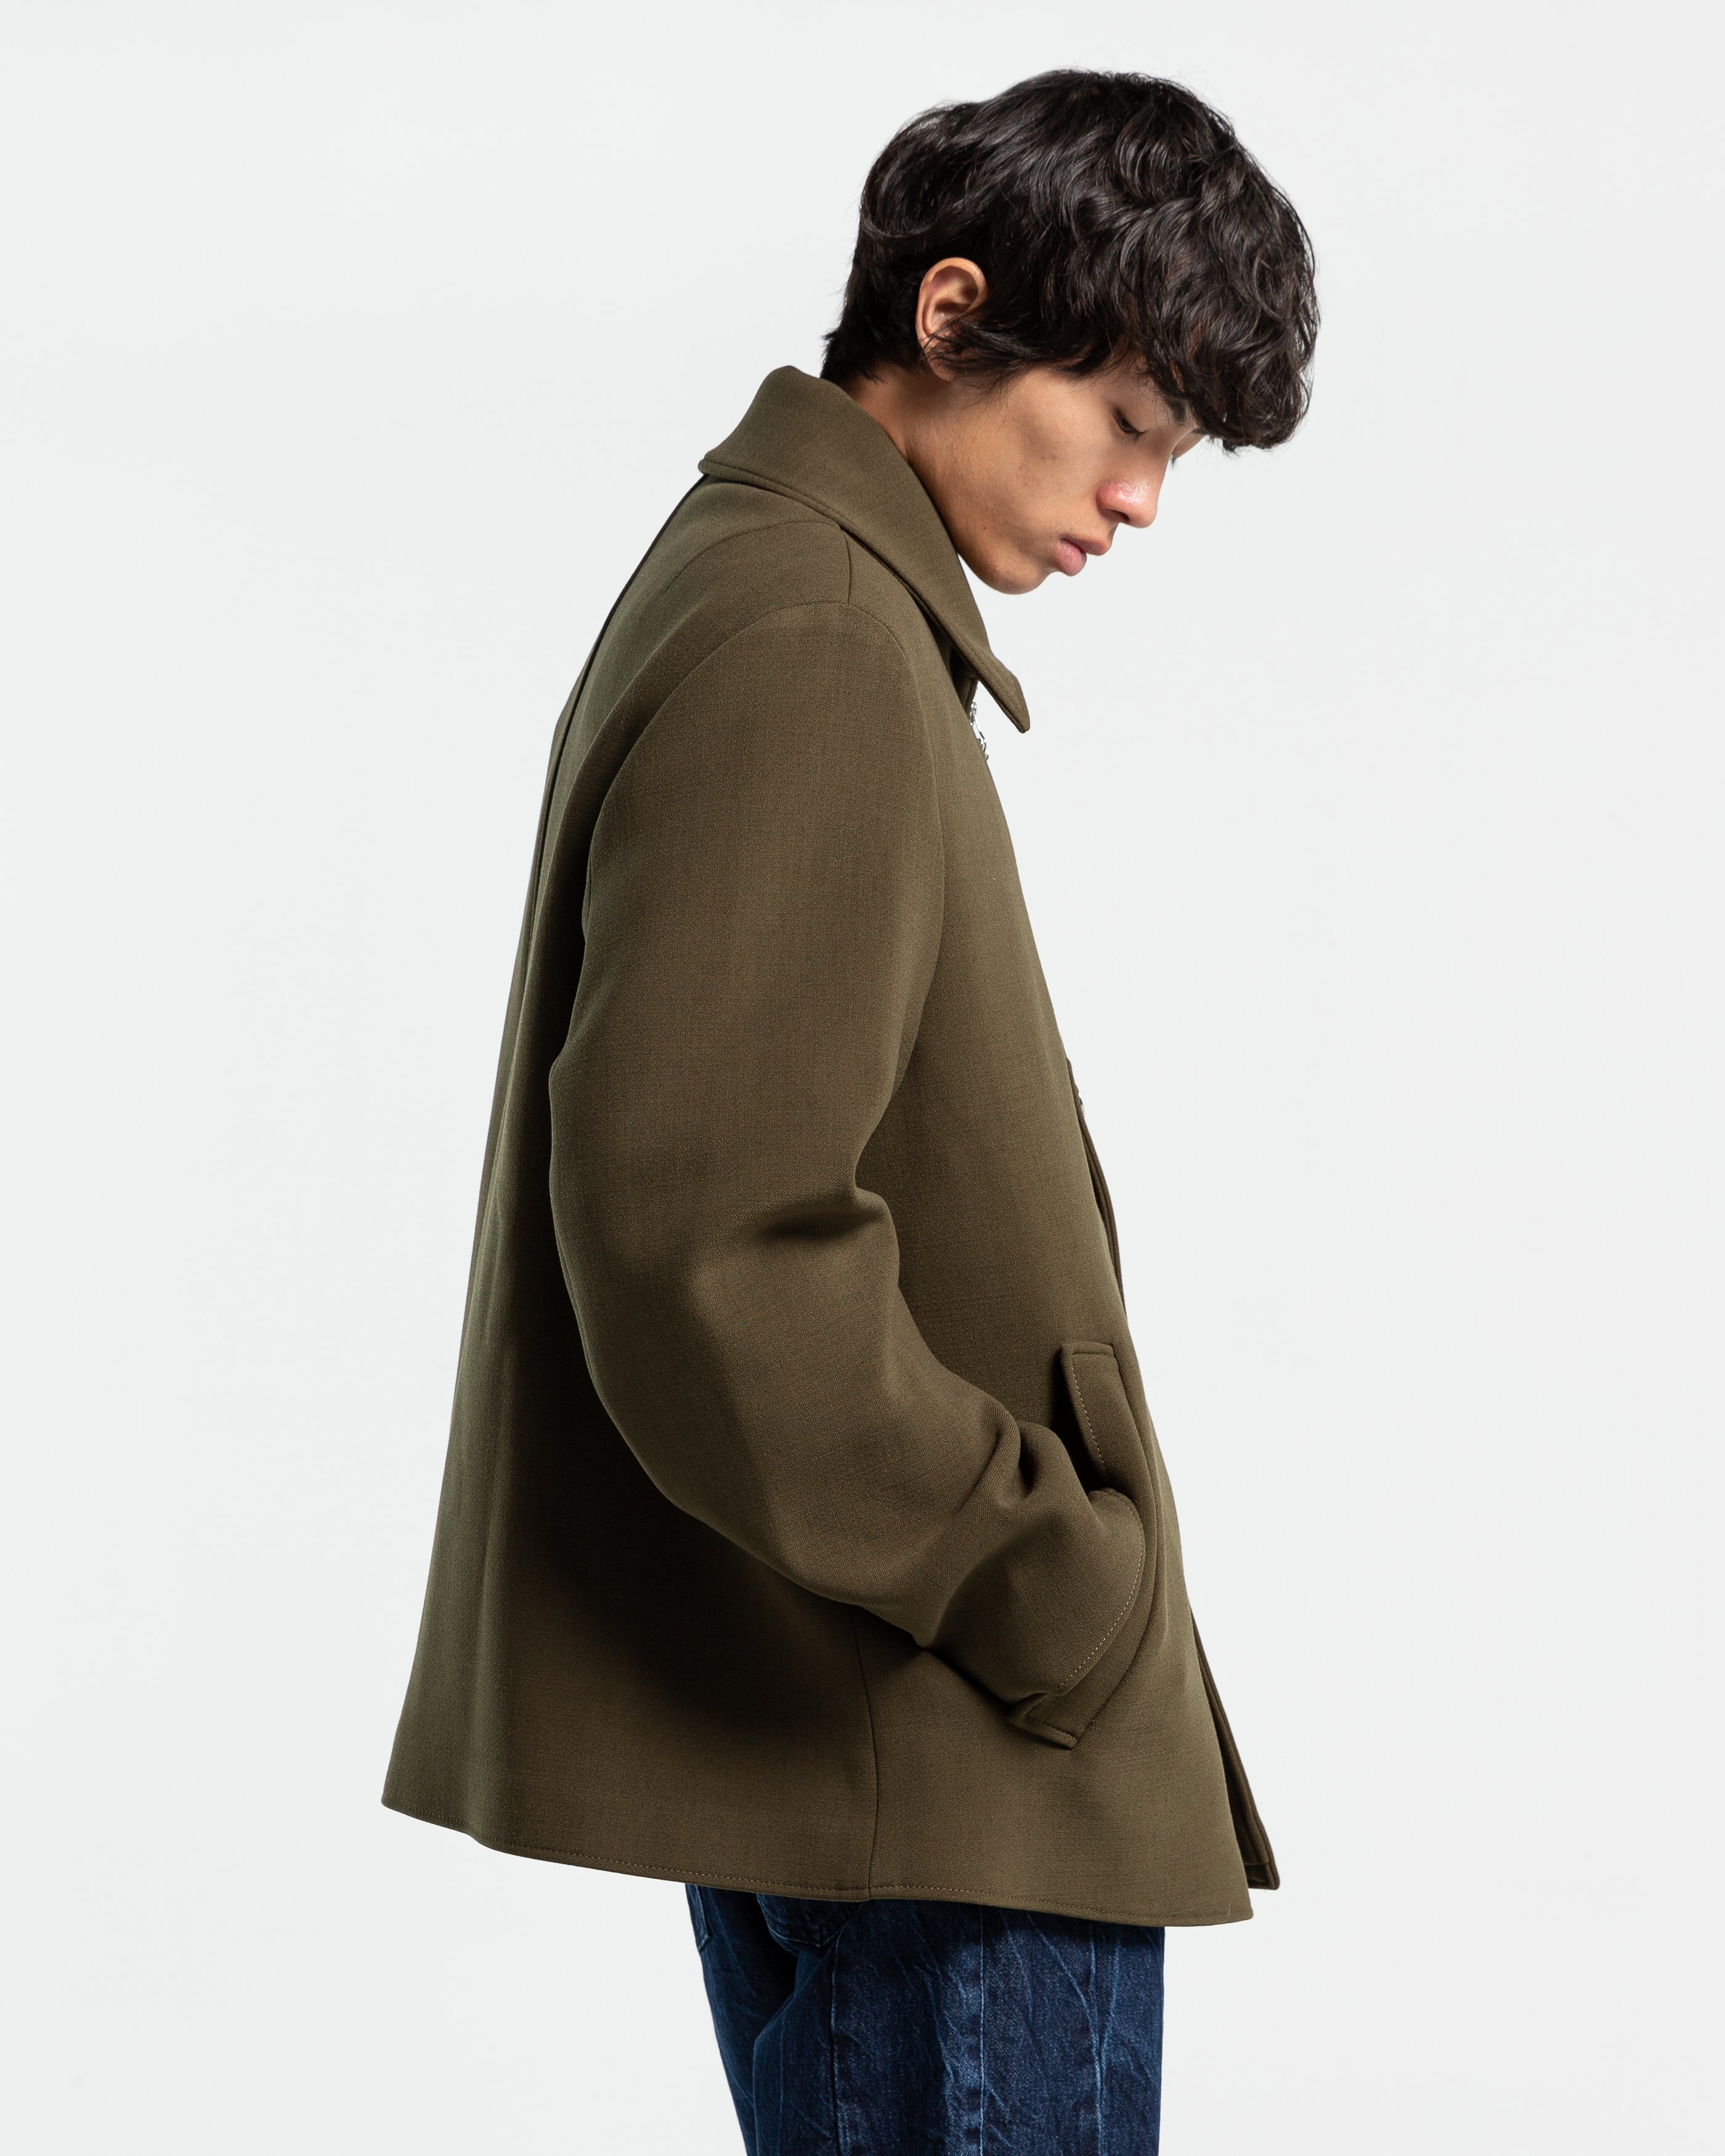 Tauther Jacket in Moss Green